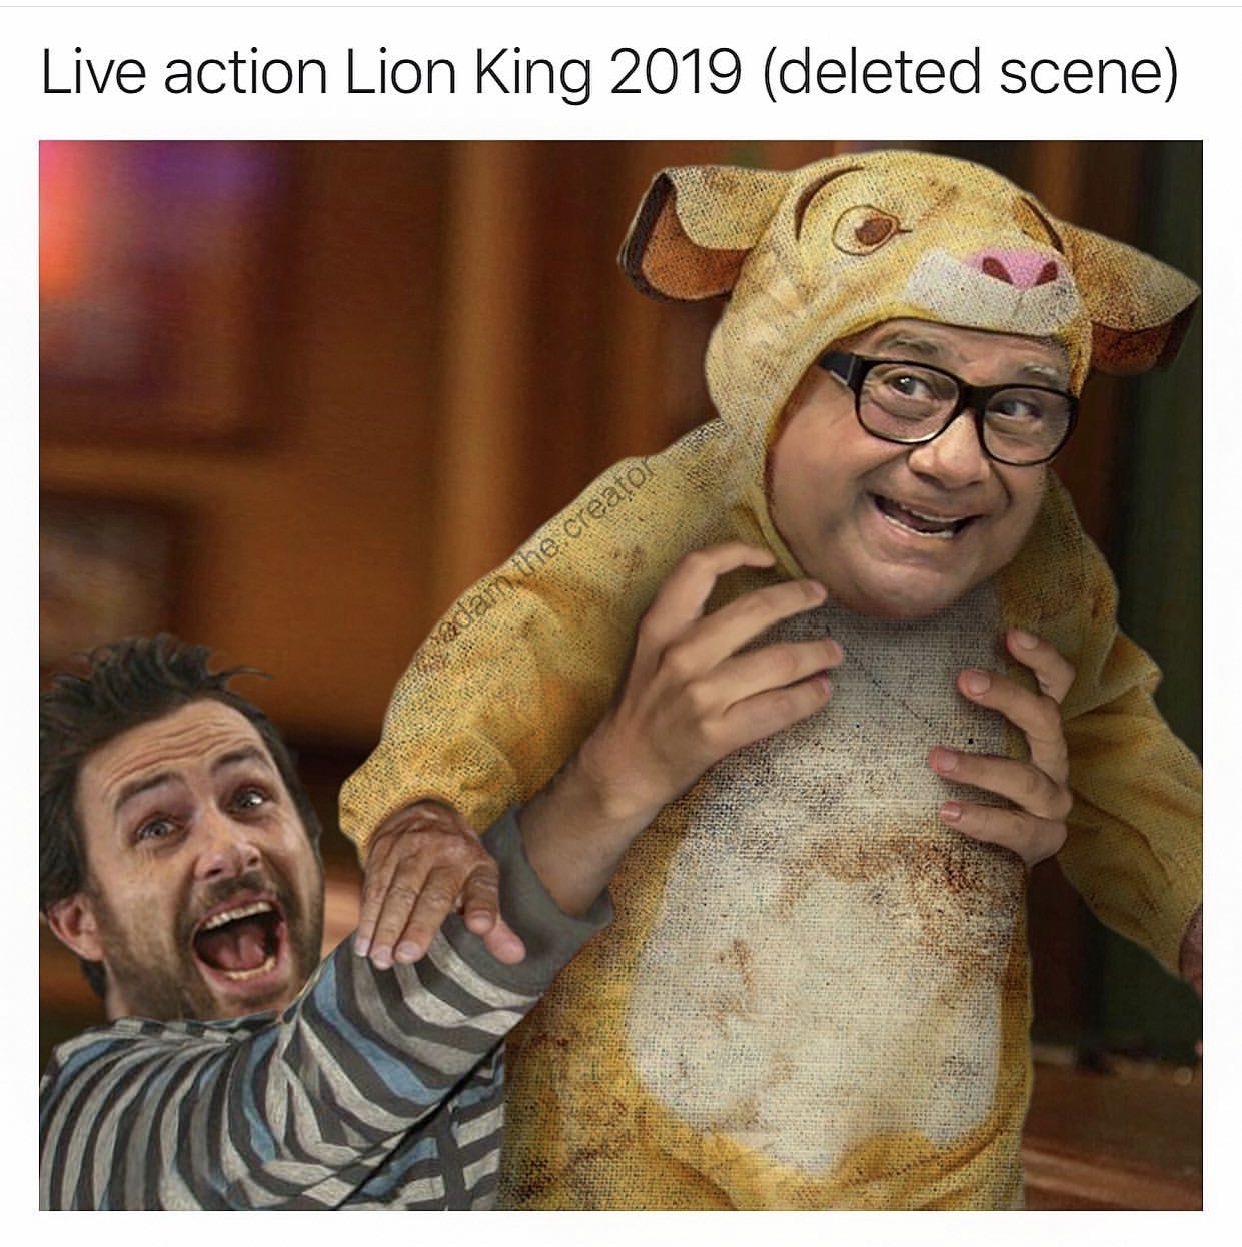 The Lion King - Live action Lion King 2019 deleted scene adamgine creator